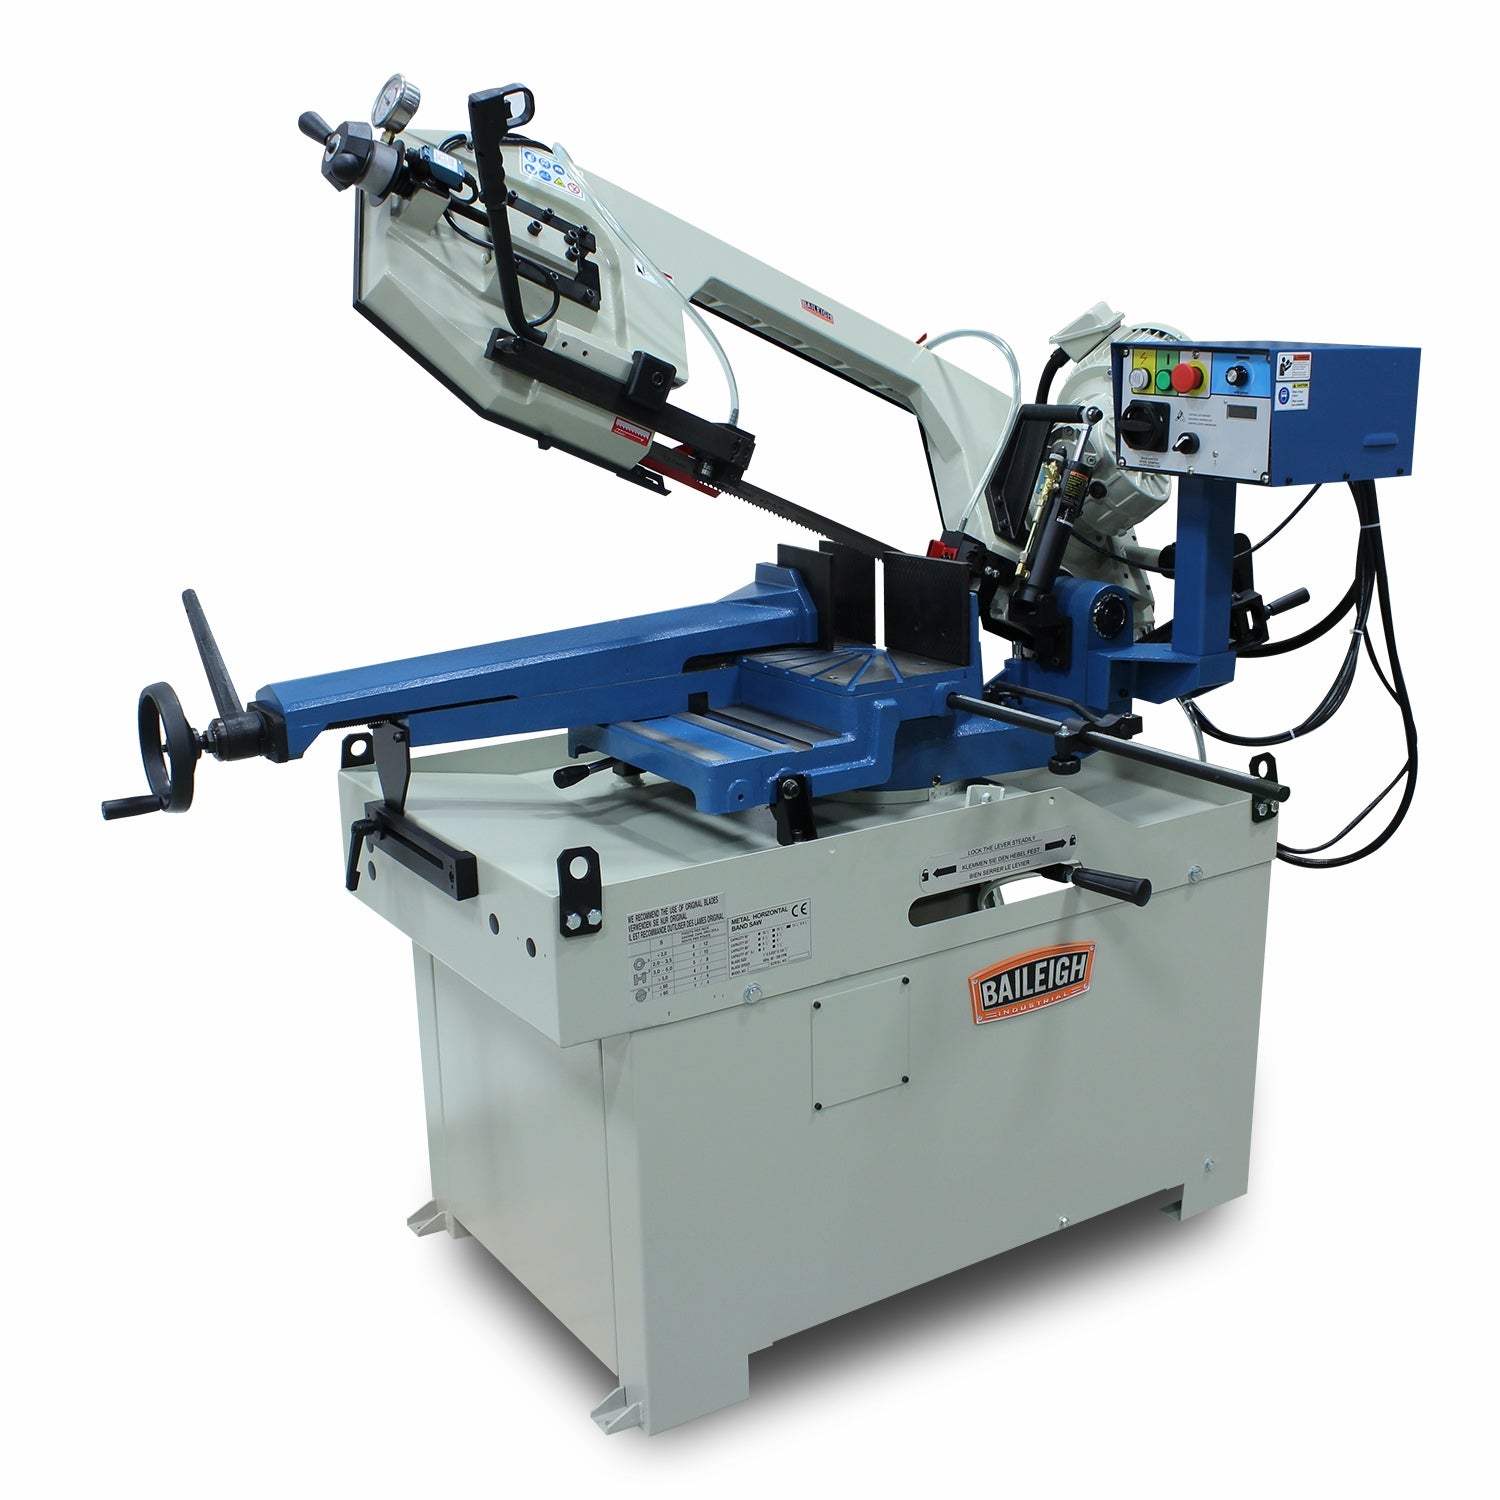 Baileigh BS-350M 220 Volt Single Phase Dual Mitering Metal Cutting Band Saw